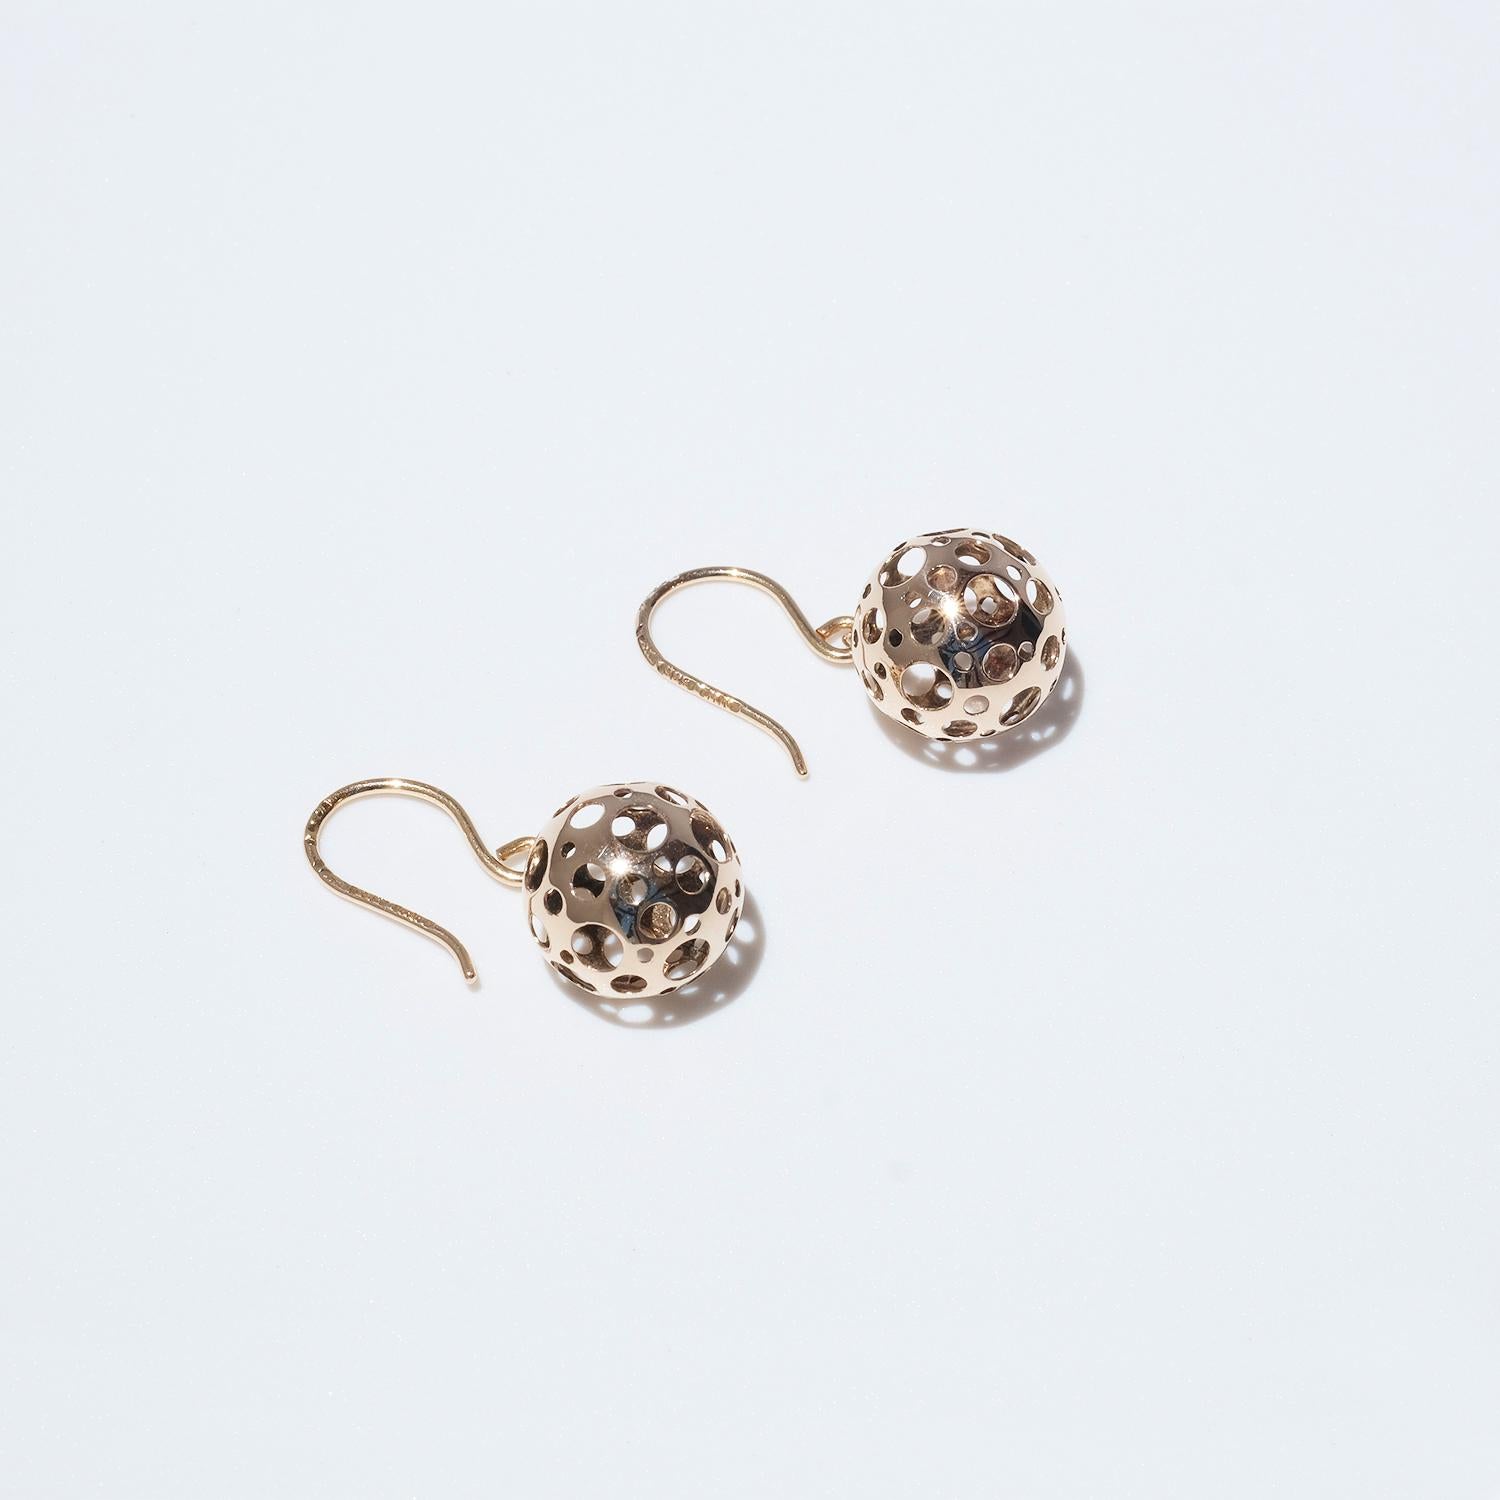 These 14 karat gold earrings are part of Liisa Vitali's famous serie “Leppäkerttu”, which means ladybug. The earrings are shaped as globes with Vitali's signature pattern of circular cut-outs.

The earrings are smallish, but yet eye-catching. This